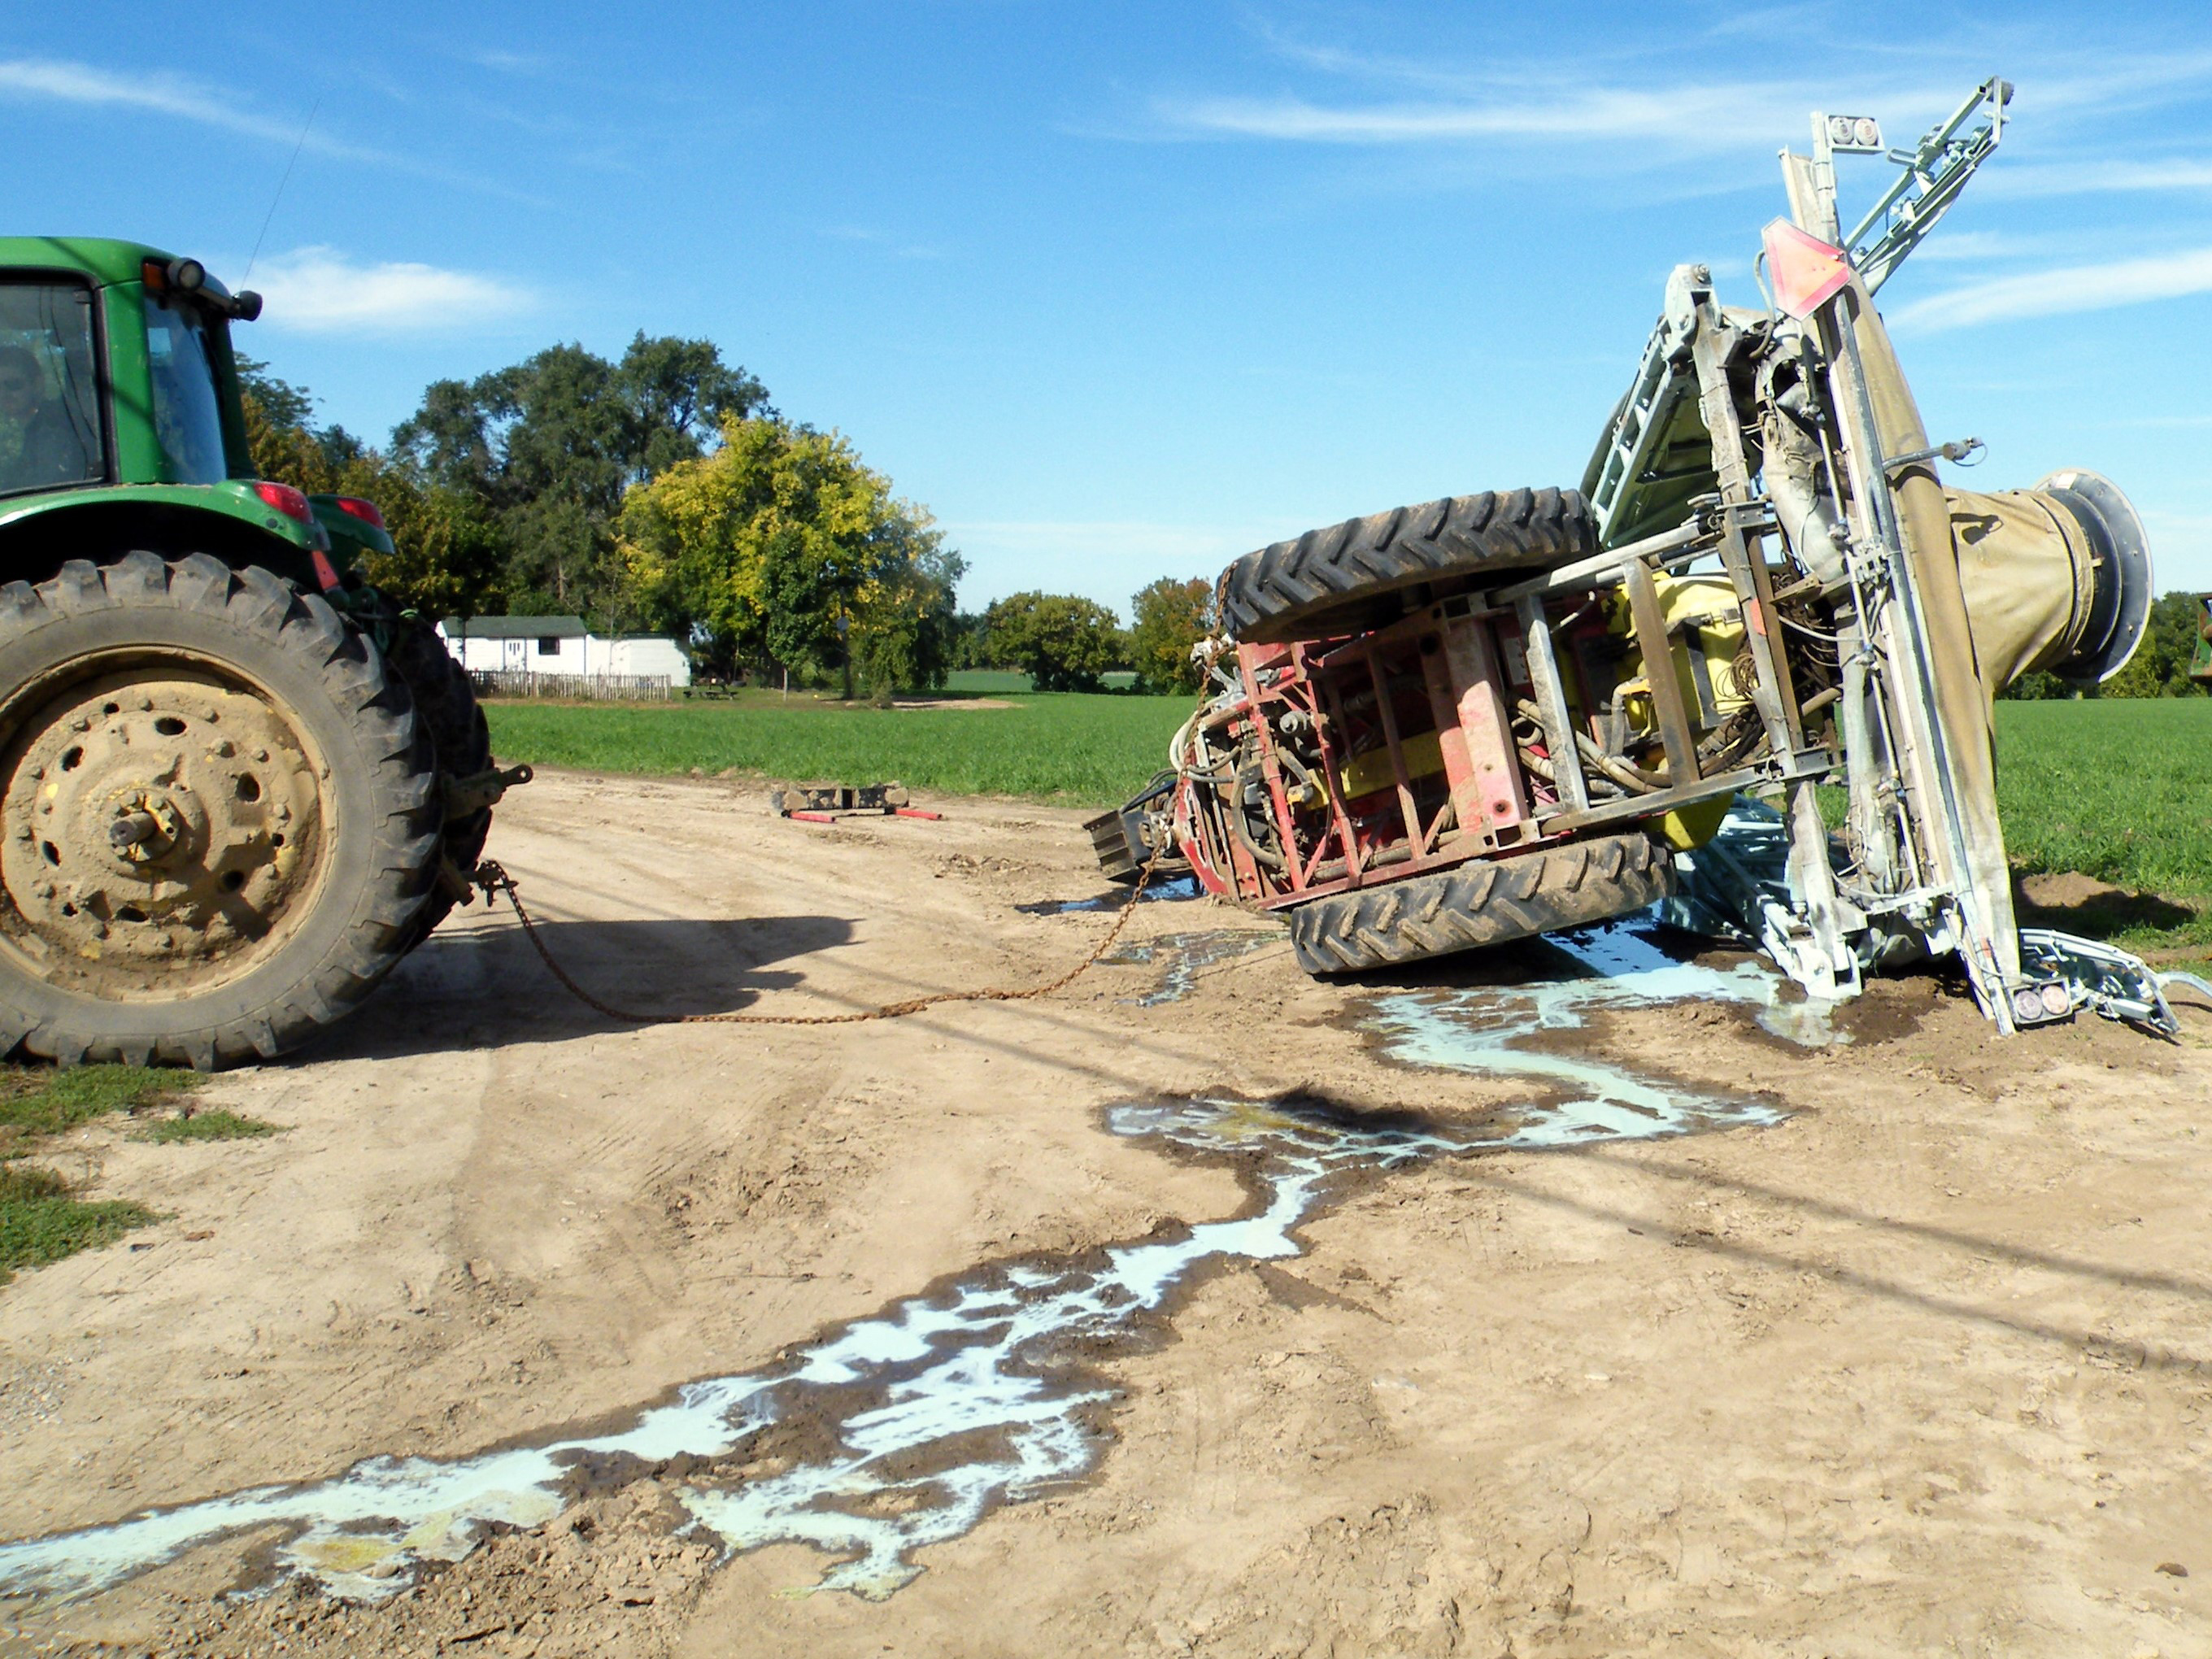 This sprayer operator took a tight turn too quickly on soft ground with a full tank, resulting in equipment damage and a pesticide spill.